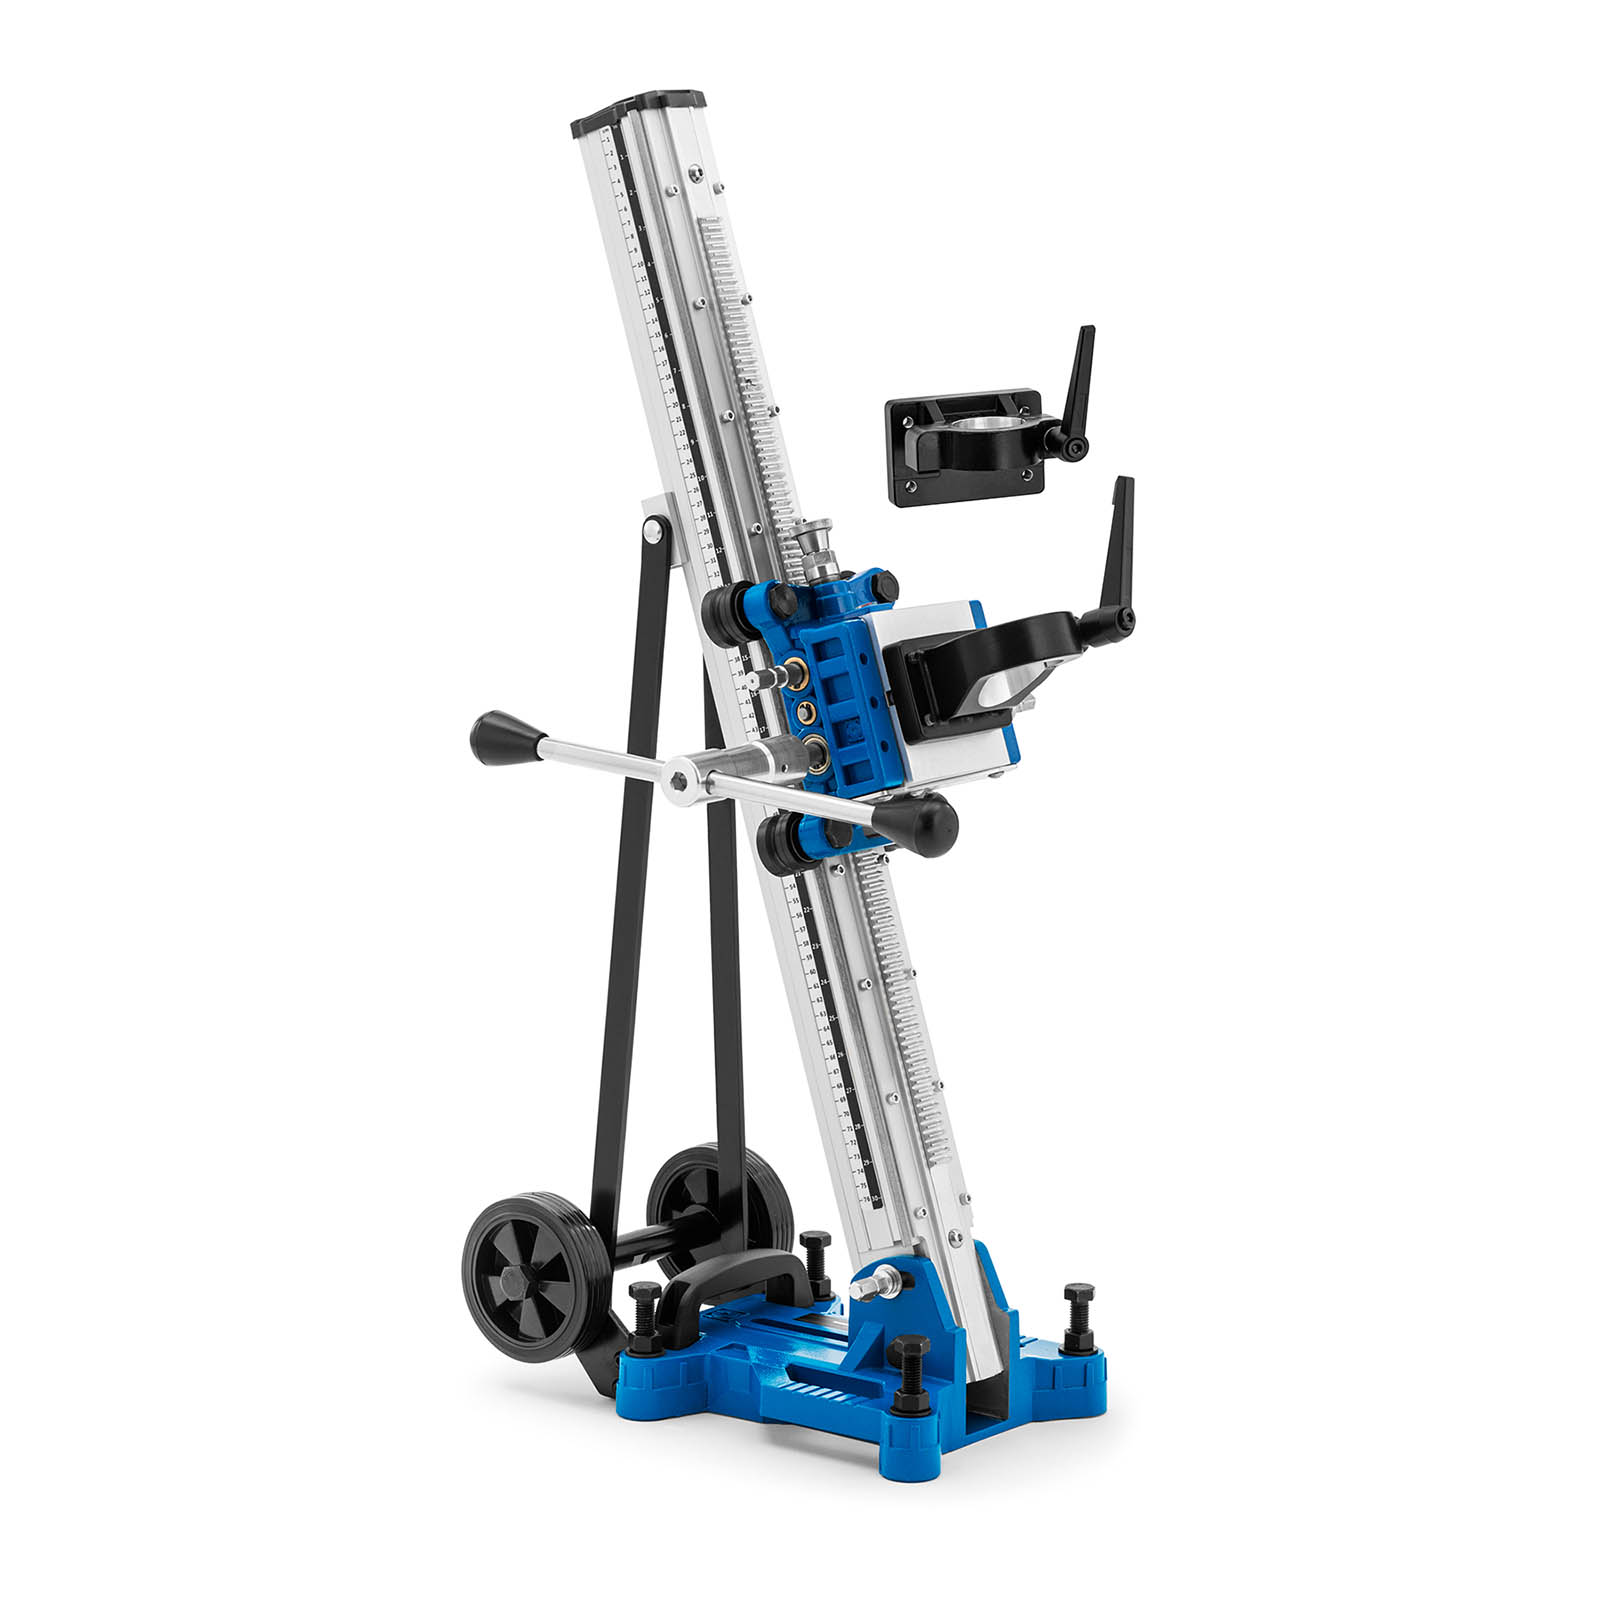 Core Drill Stand - drill diameter up to 350 mm 